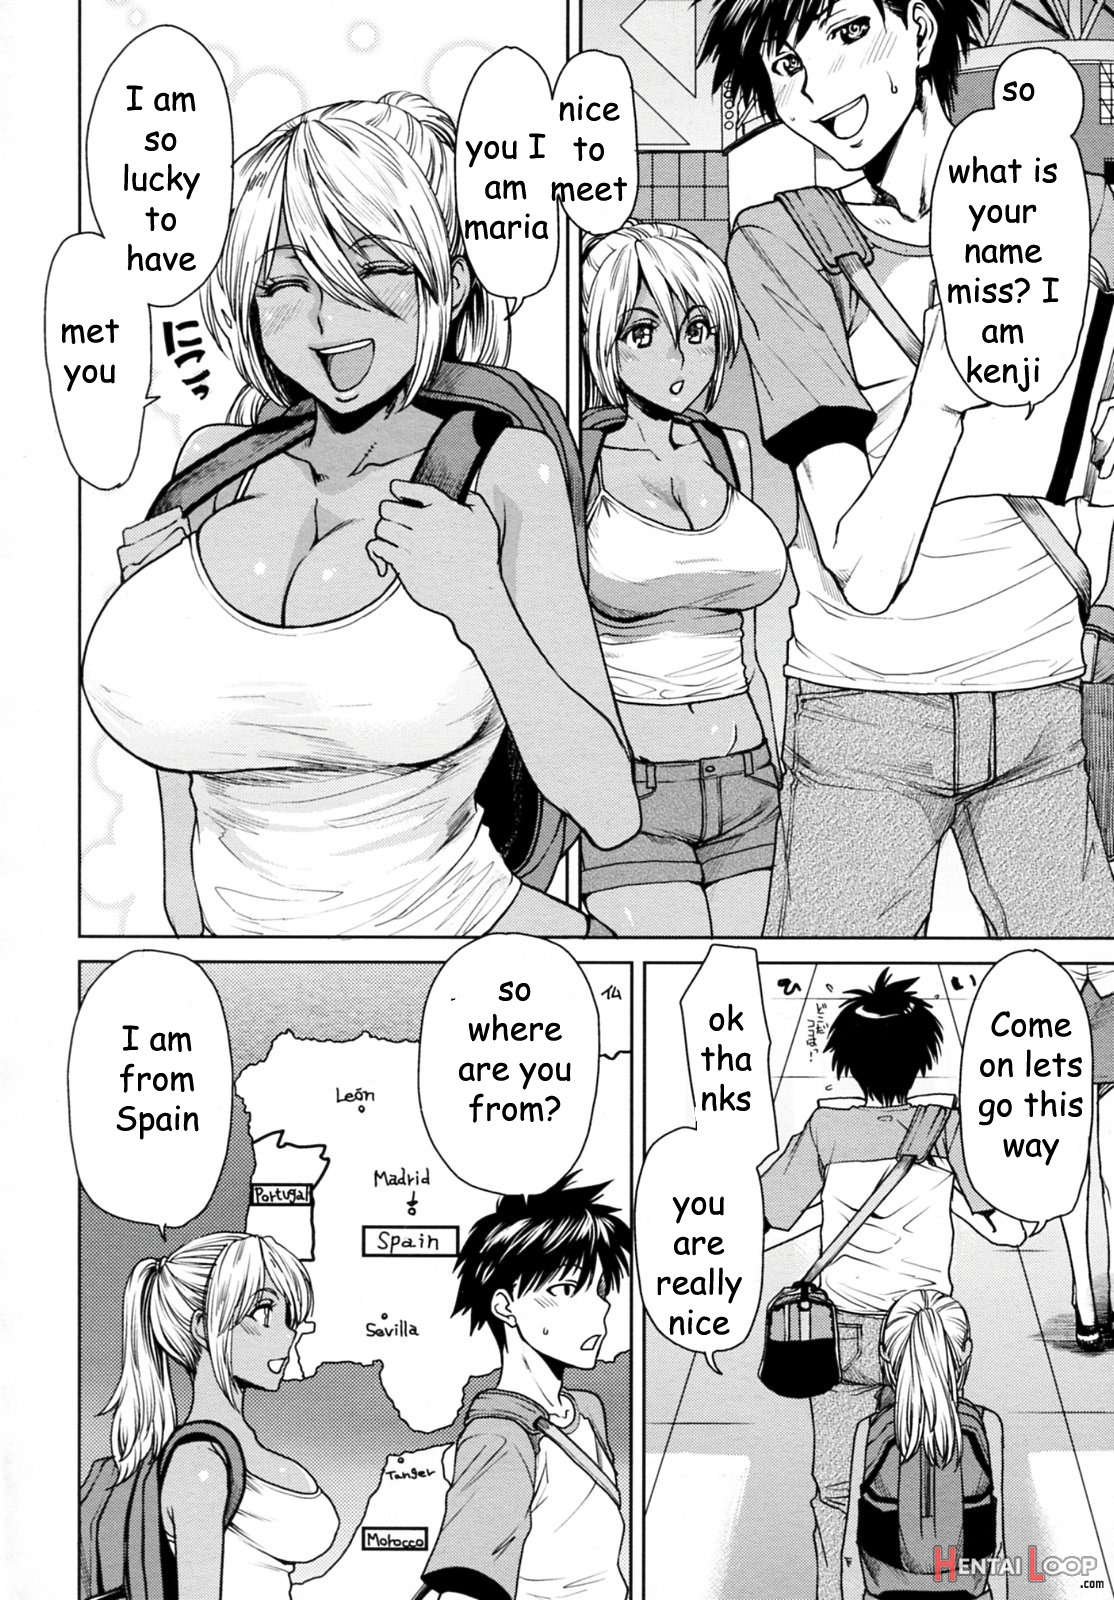 Foreign Girls page 4